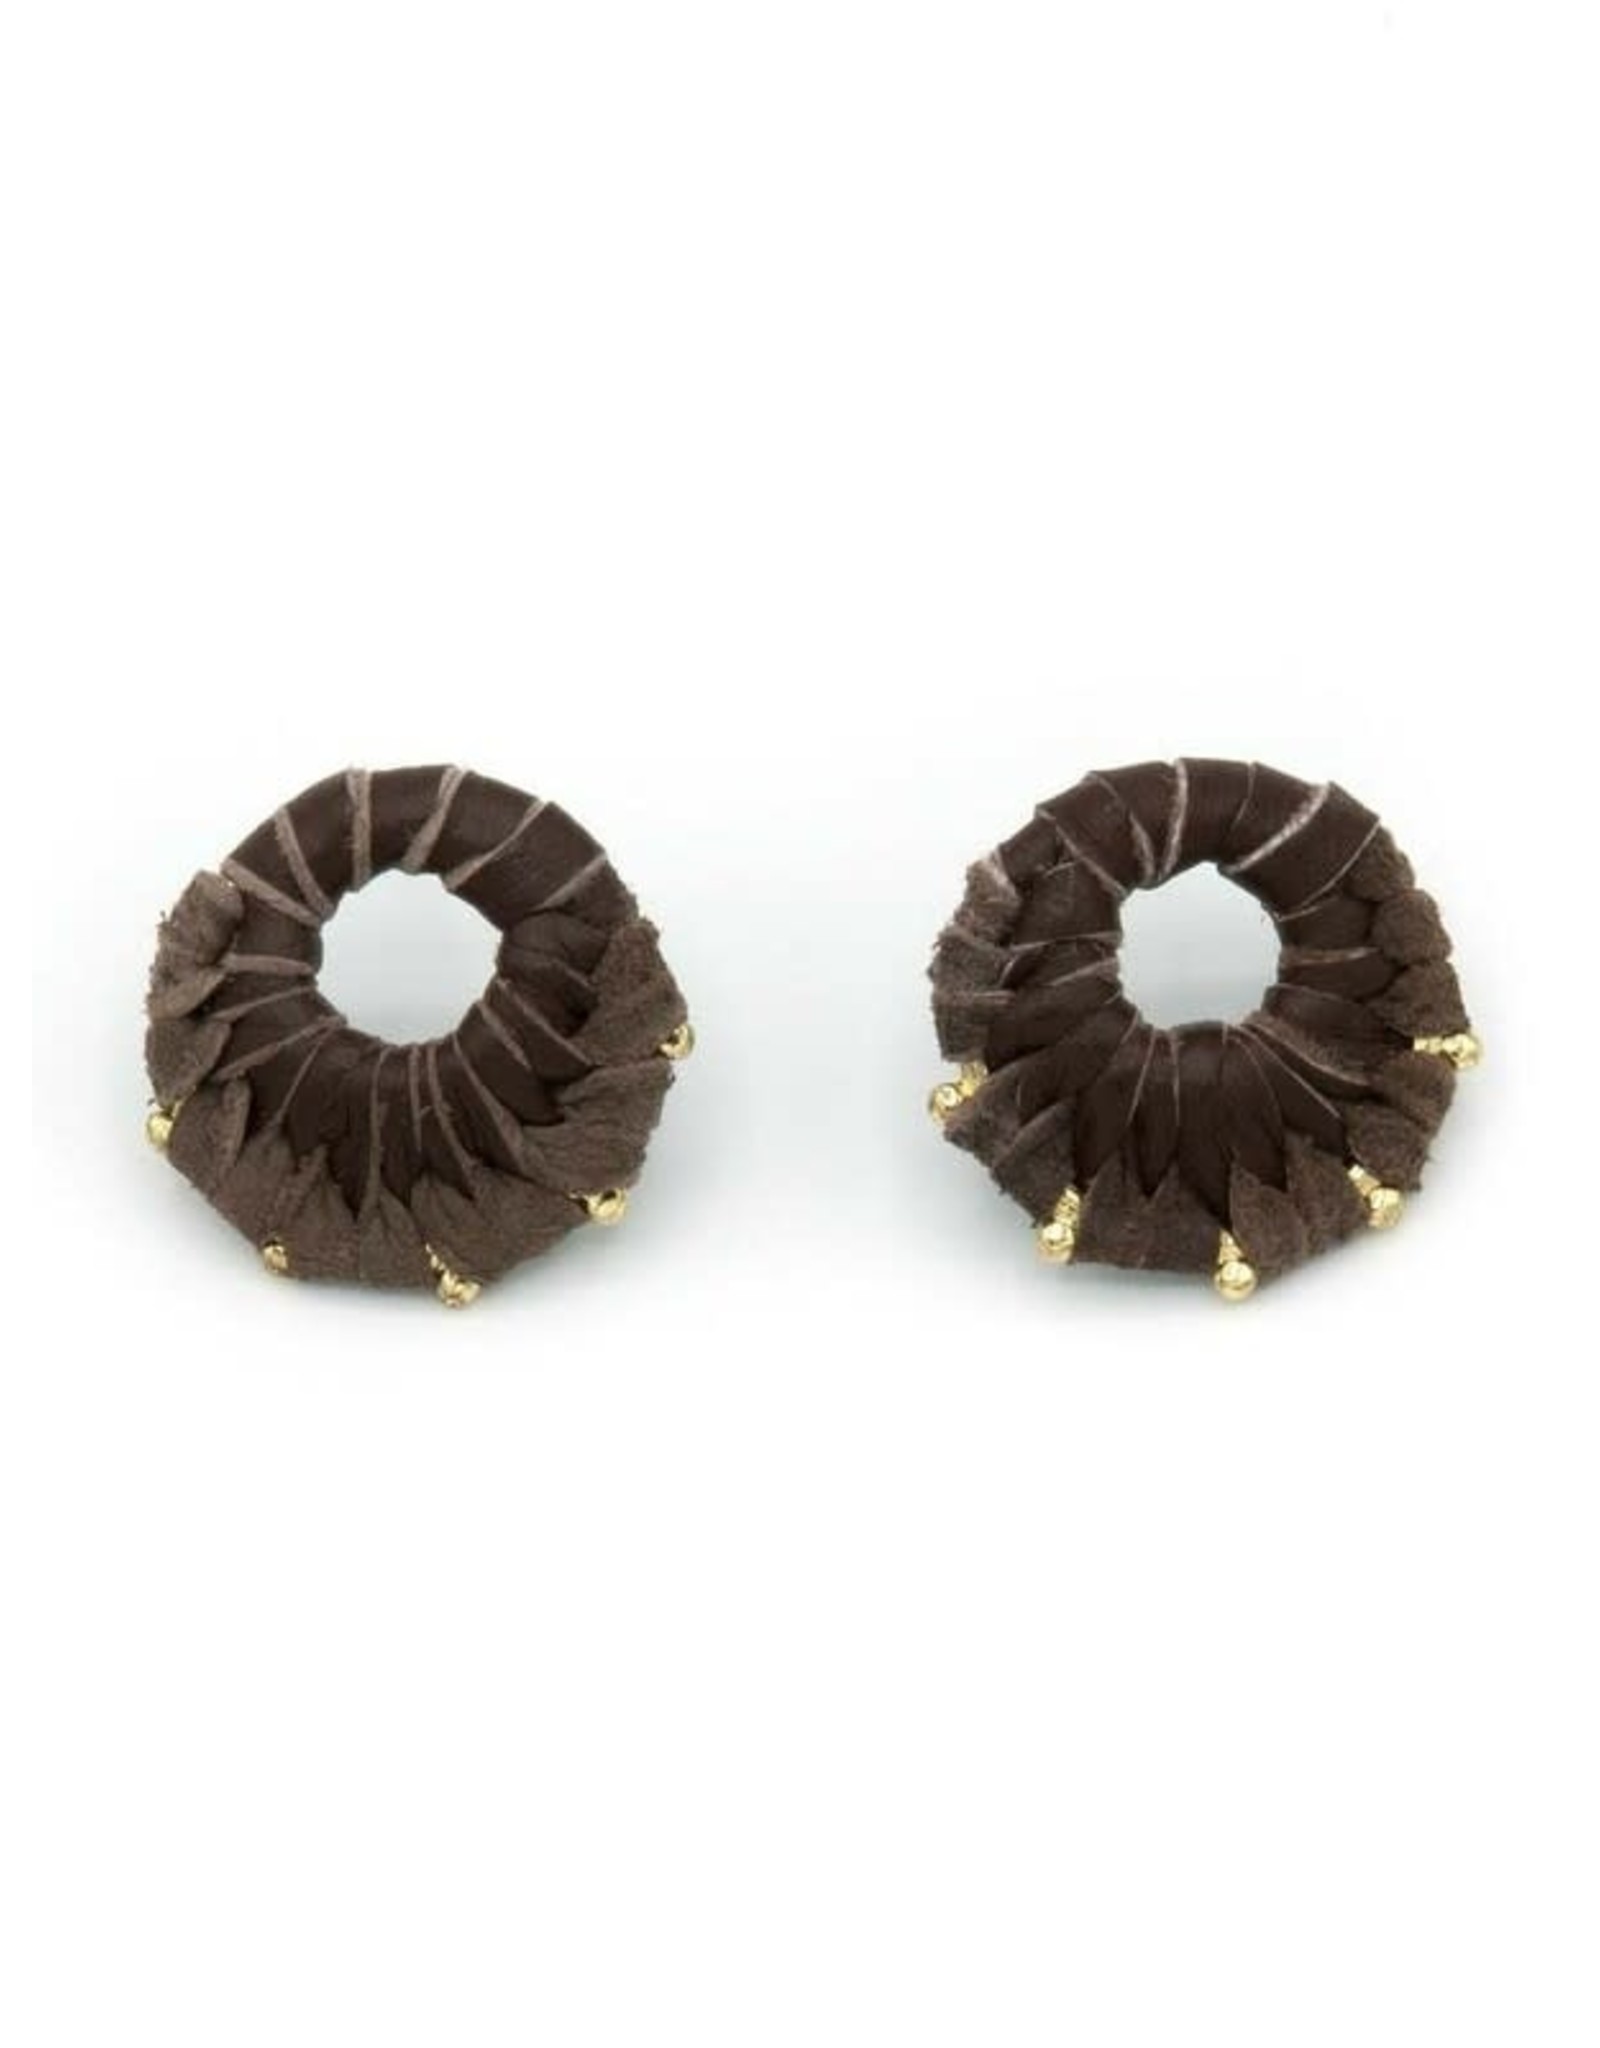 Trade roots Leather Wrap Stud Earrings, India